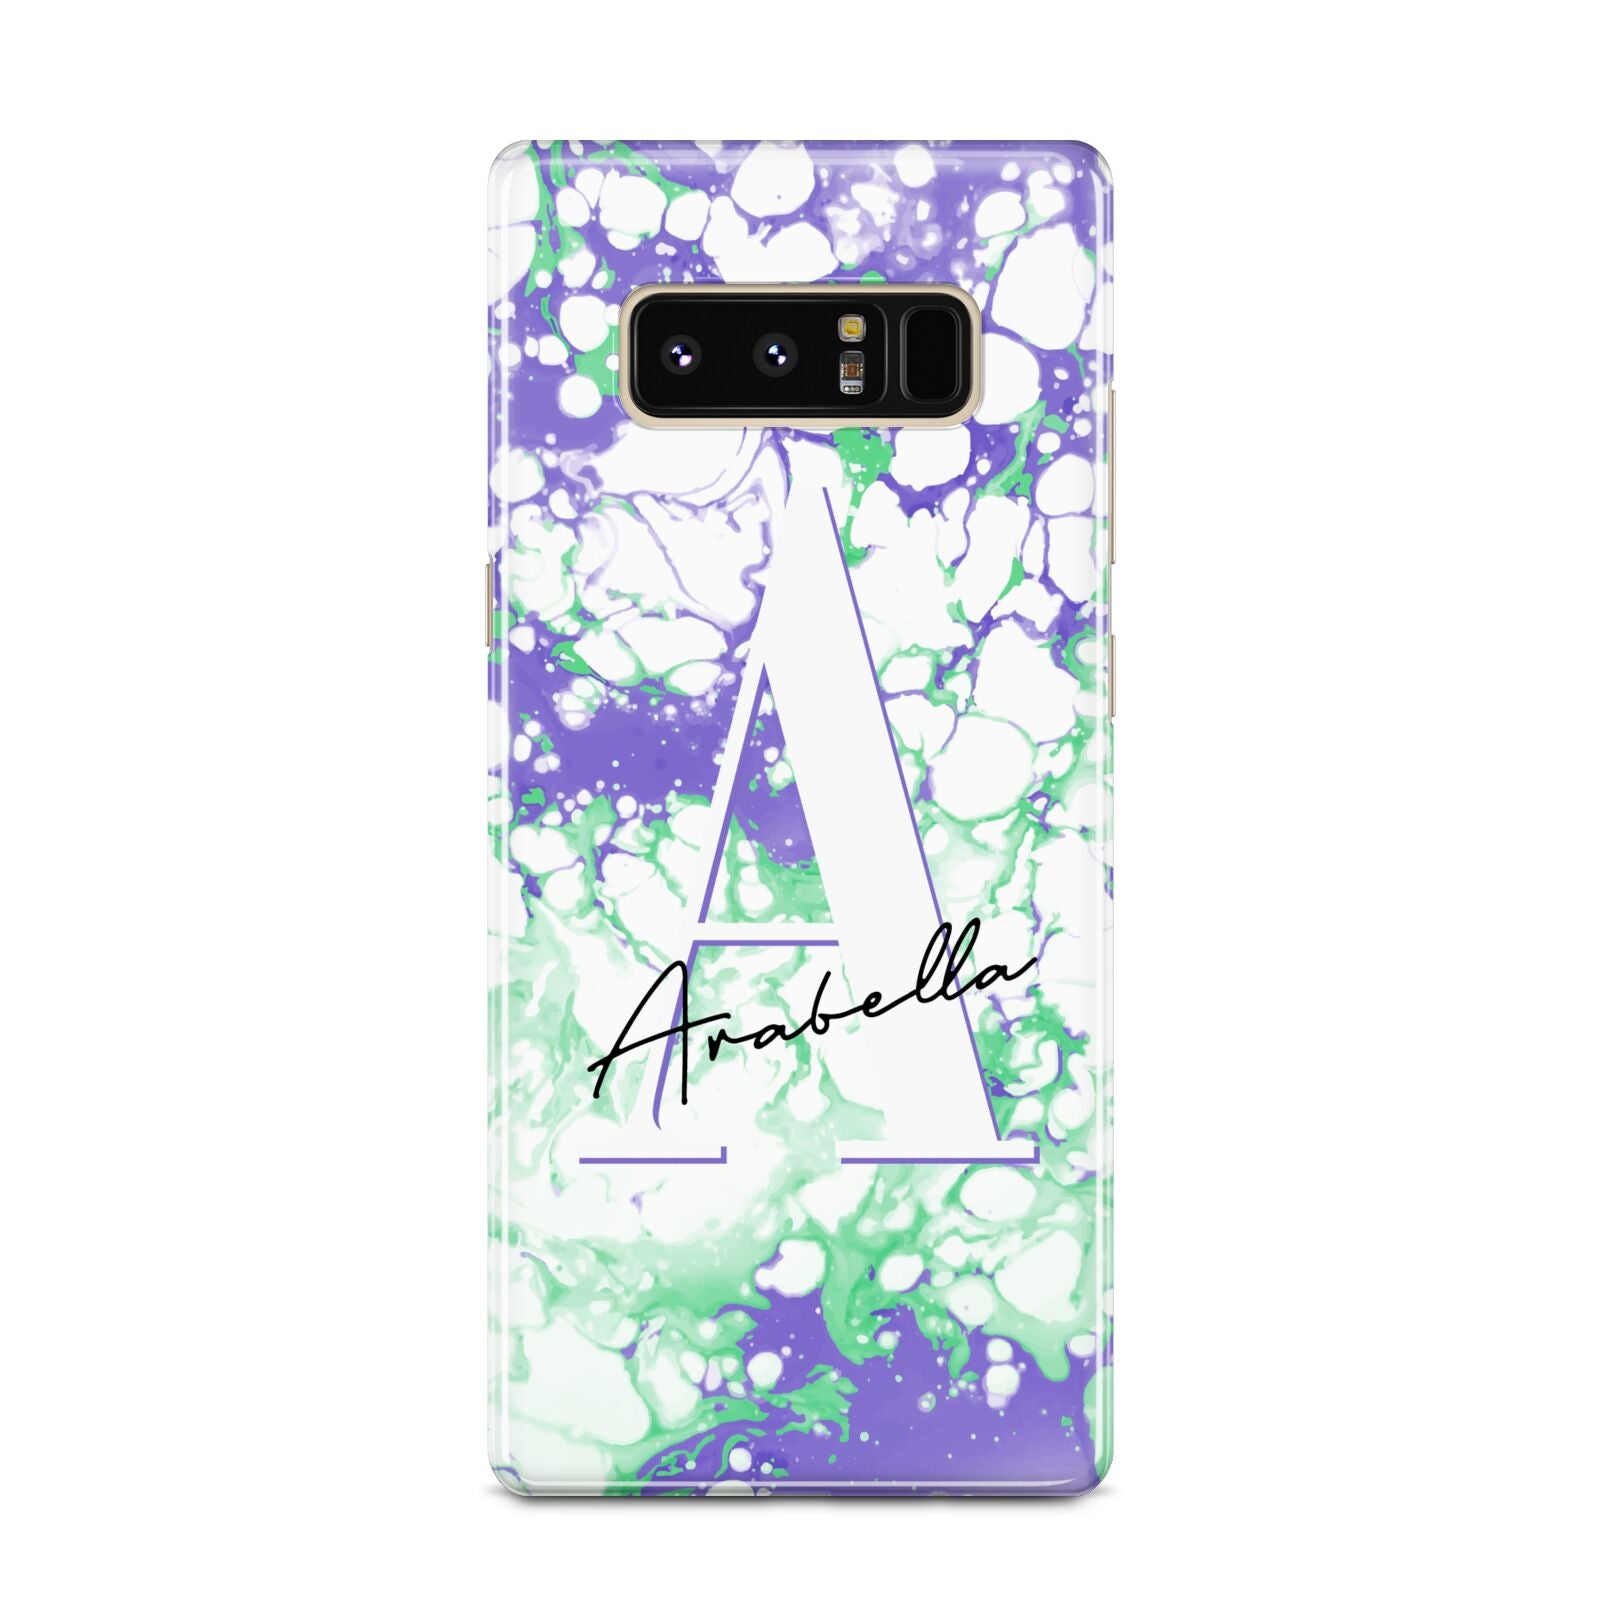 Personalised Liquid Marble Samsung Galaxy Note 8 Case